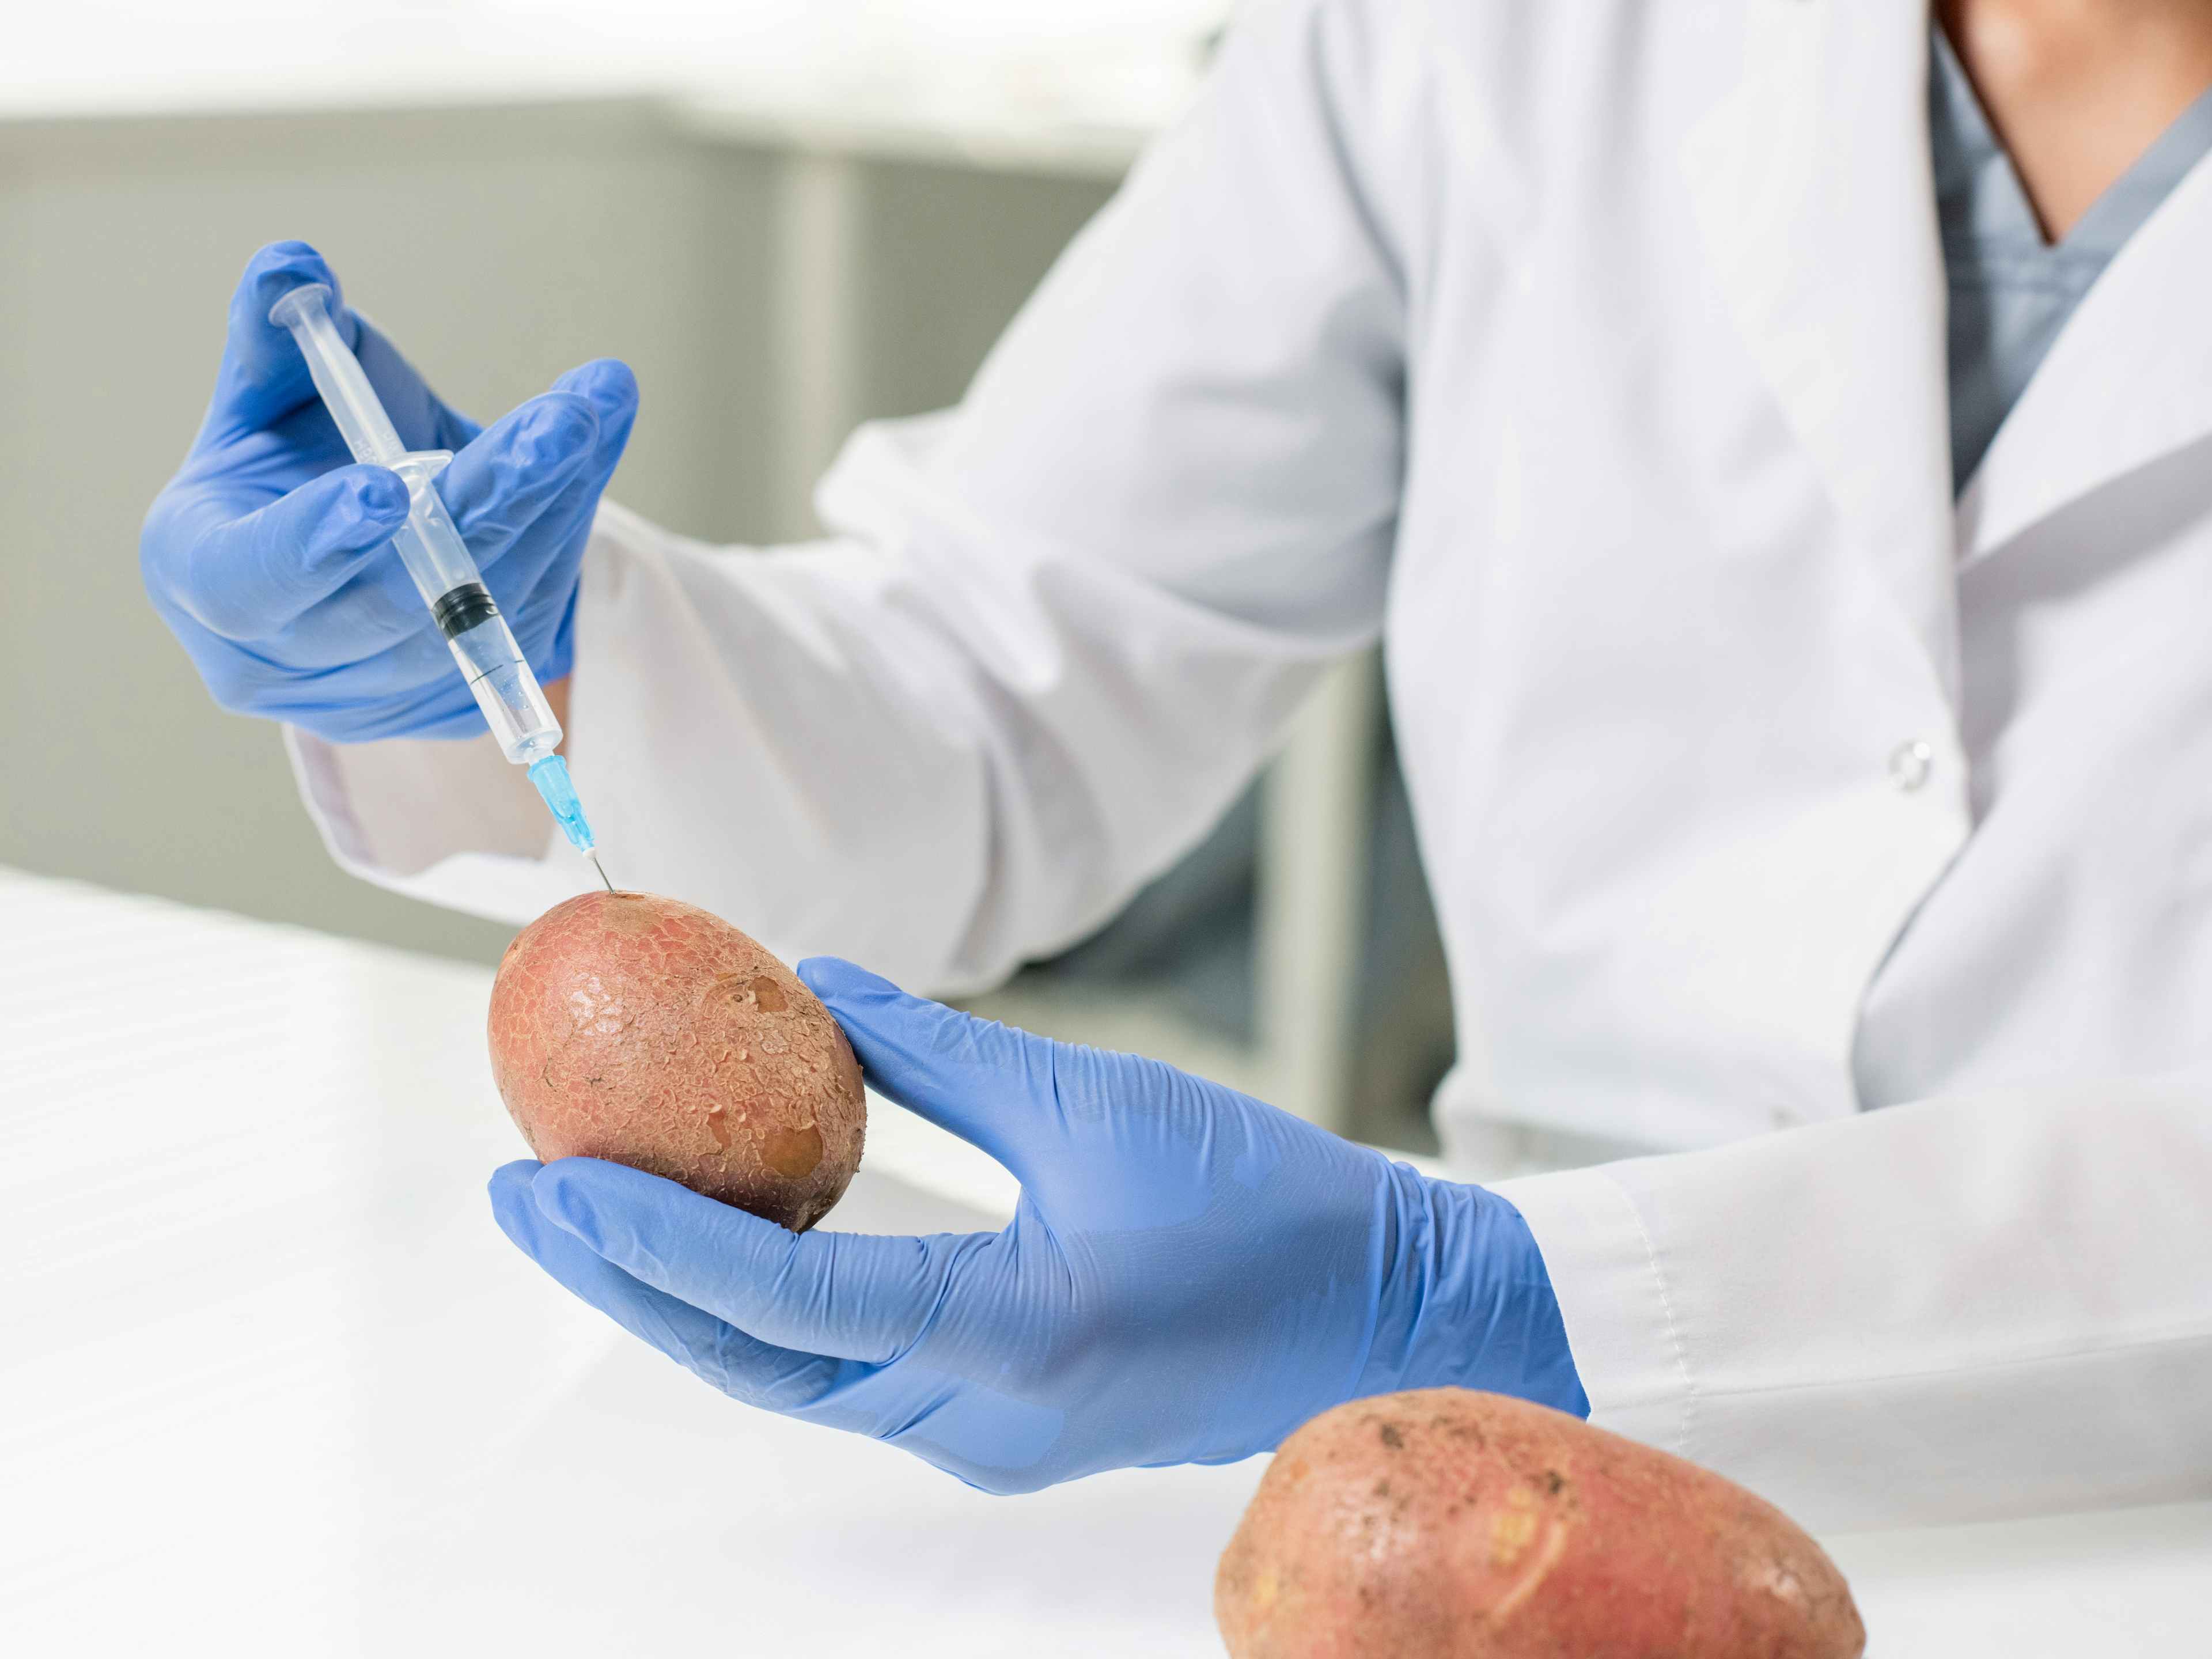 Researcher in a white coat and gloves injecting a potato